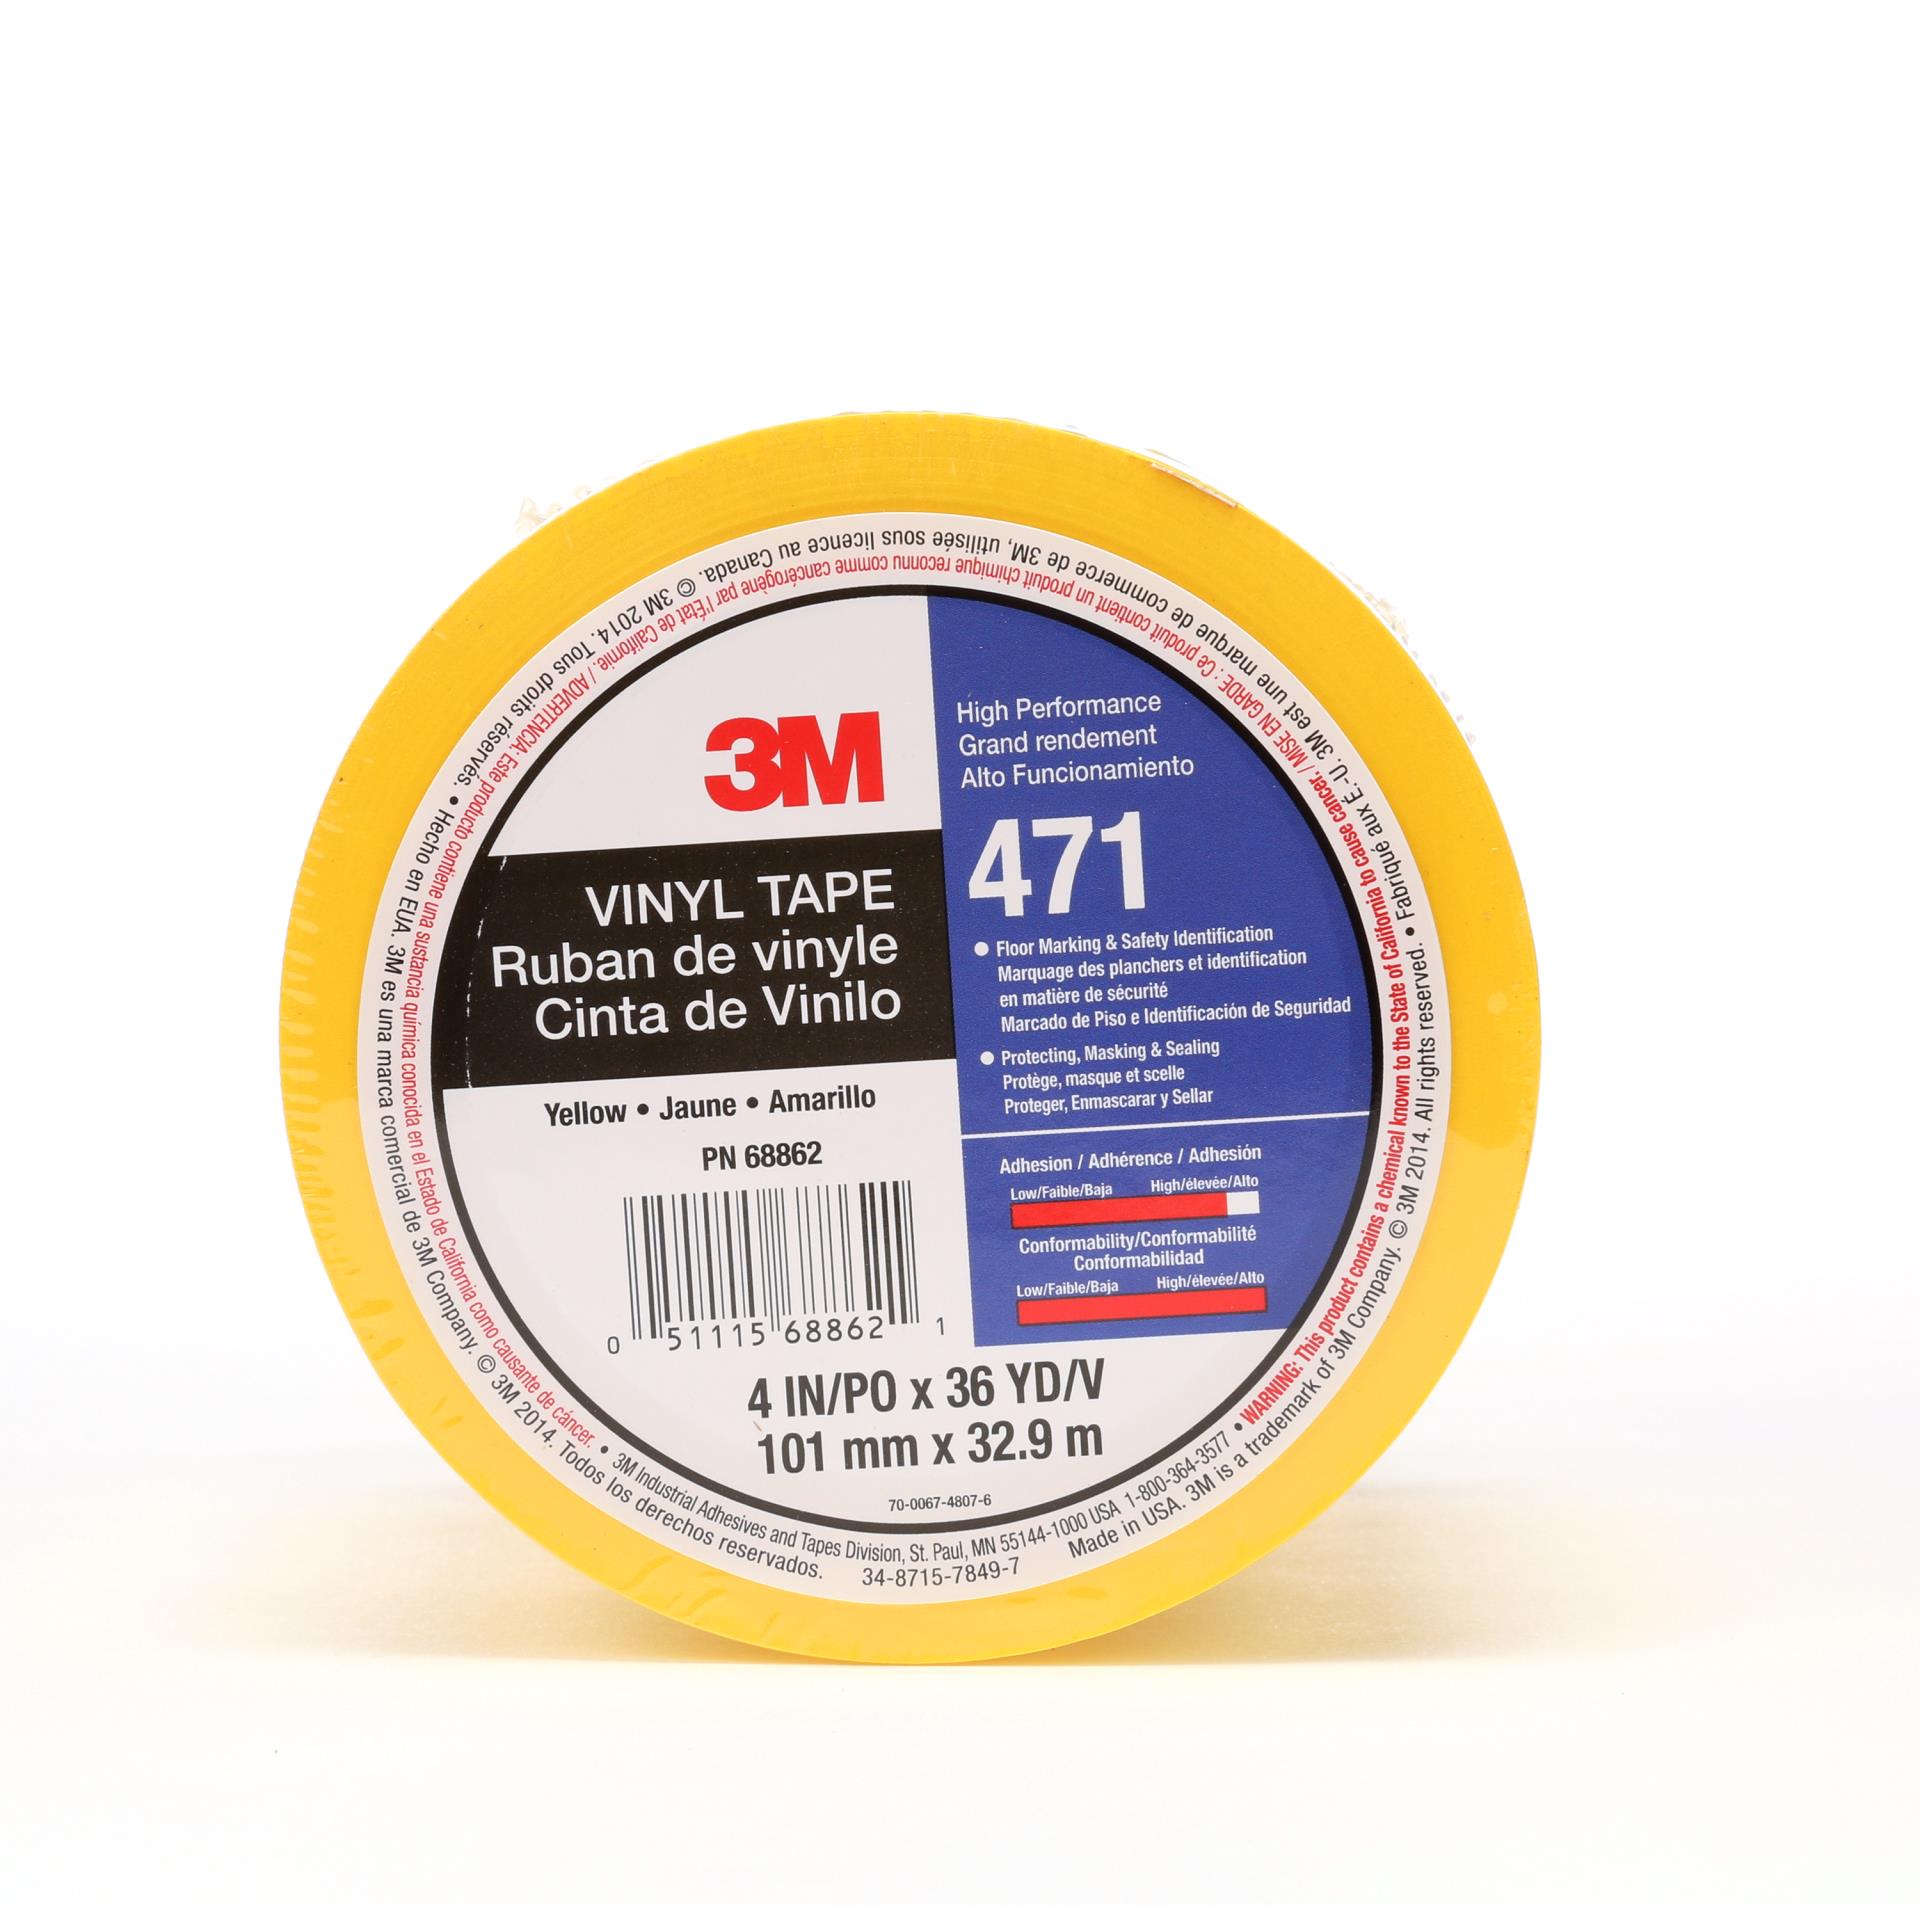 CS Hyde 19-5R UHMW .005 Mil Tape with Rubber Adhesive 7.5 x 36 Yards